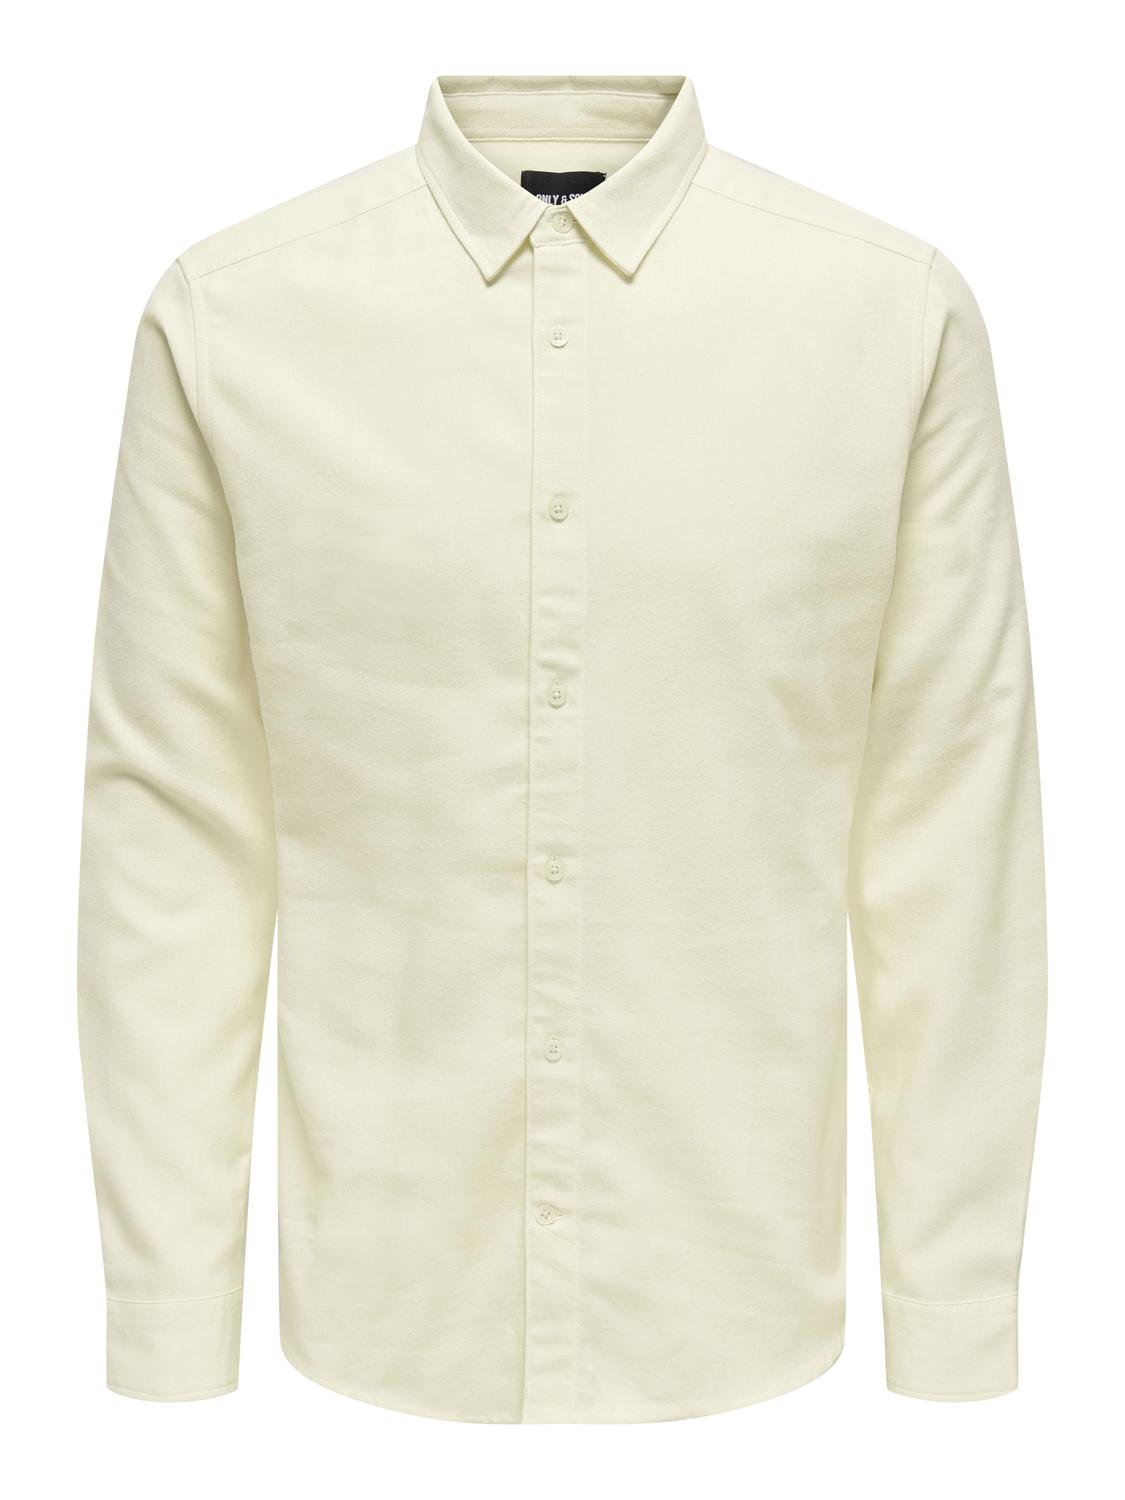 ONLY & SONS Classic shirt -Antique White - 22027786